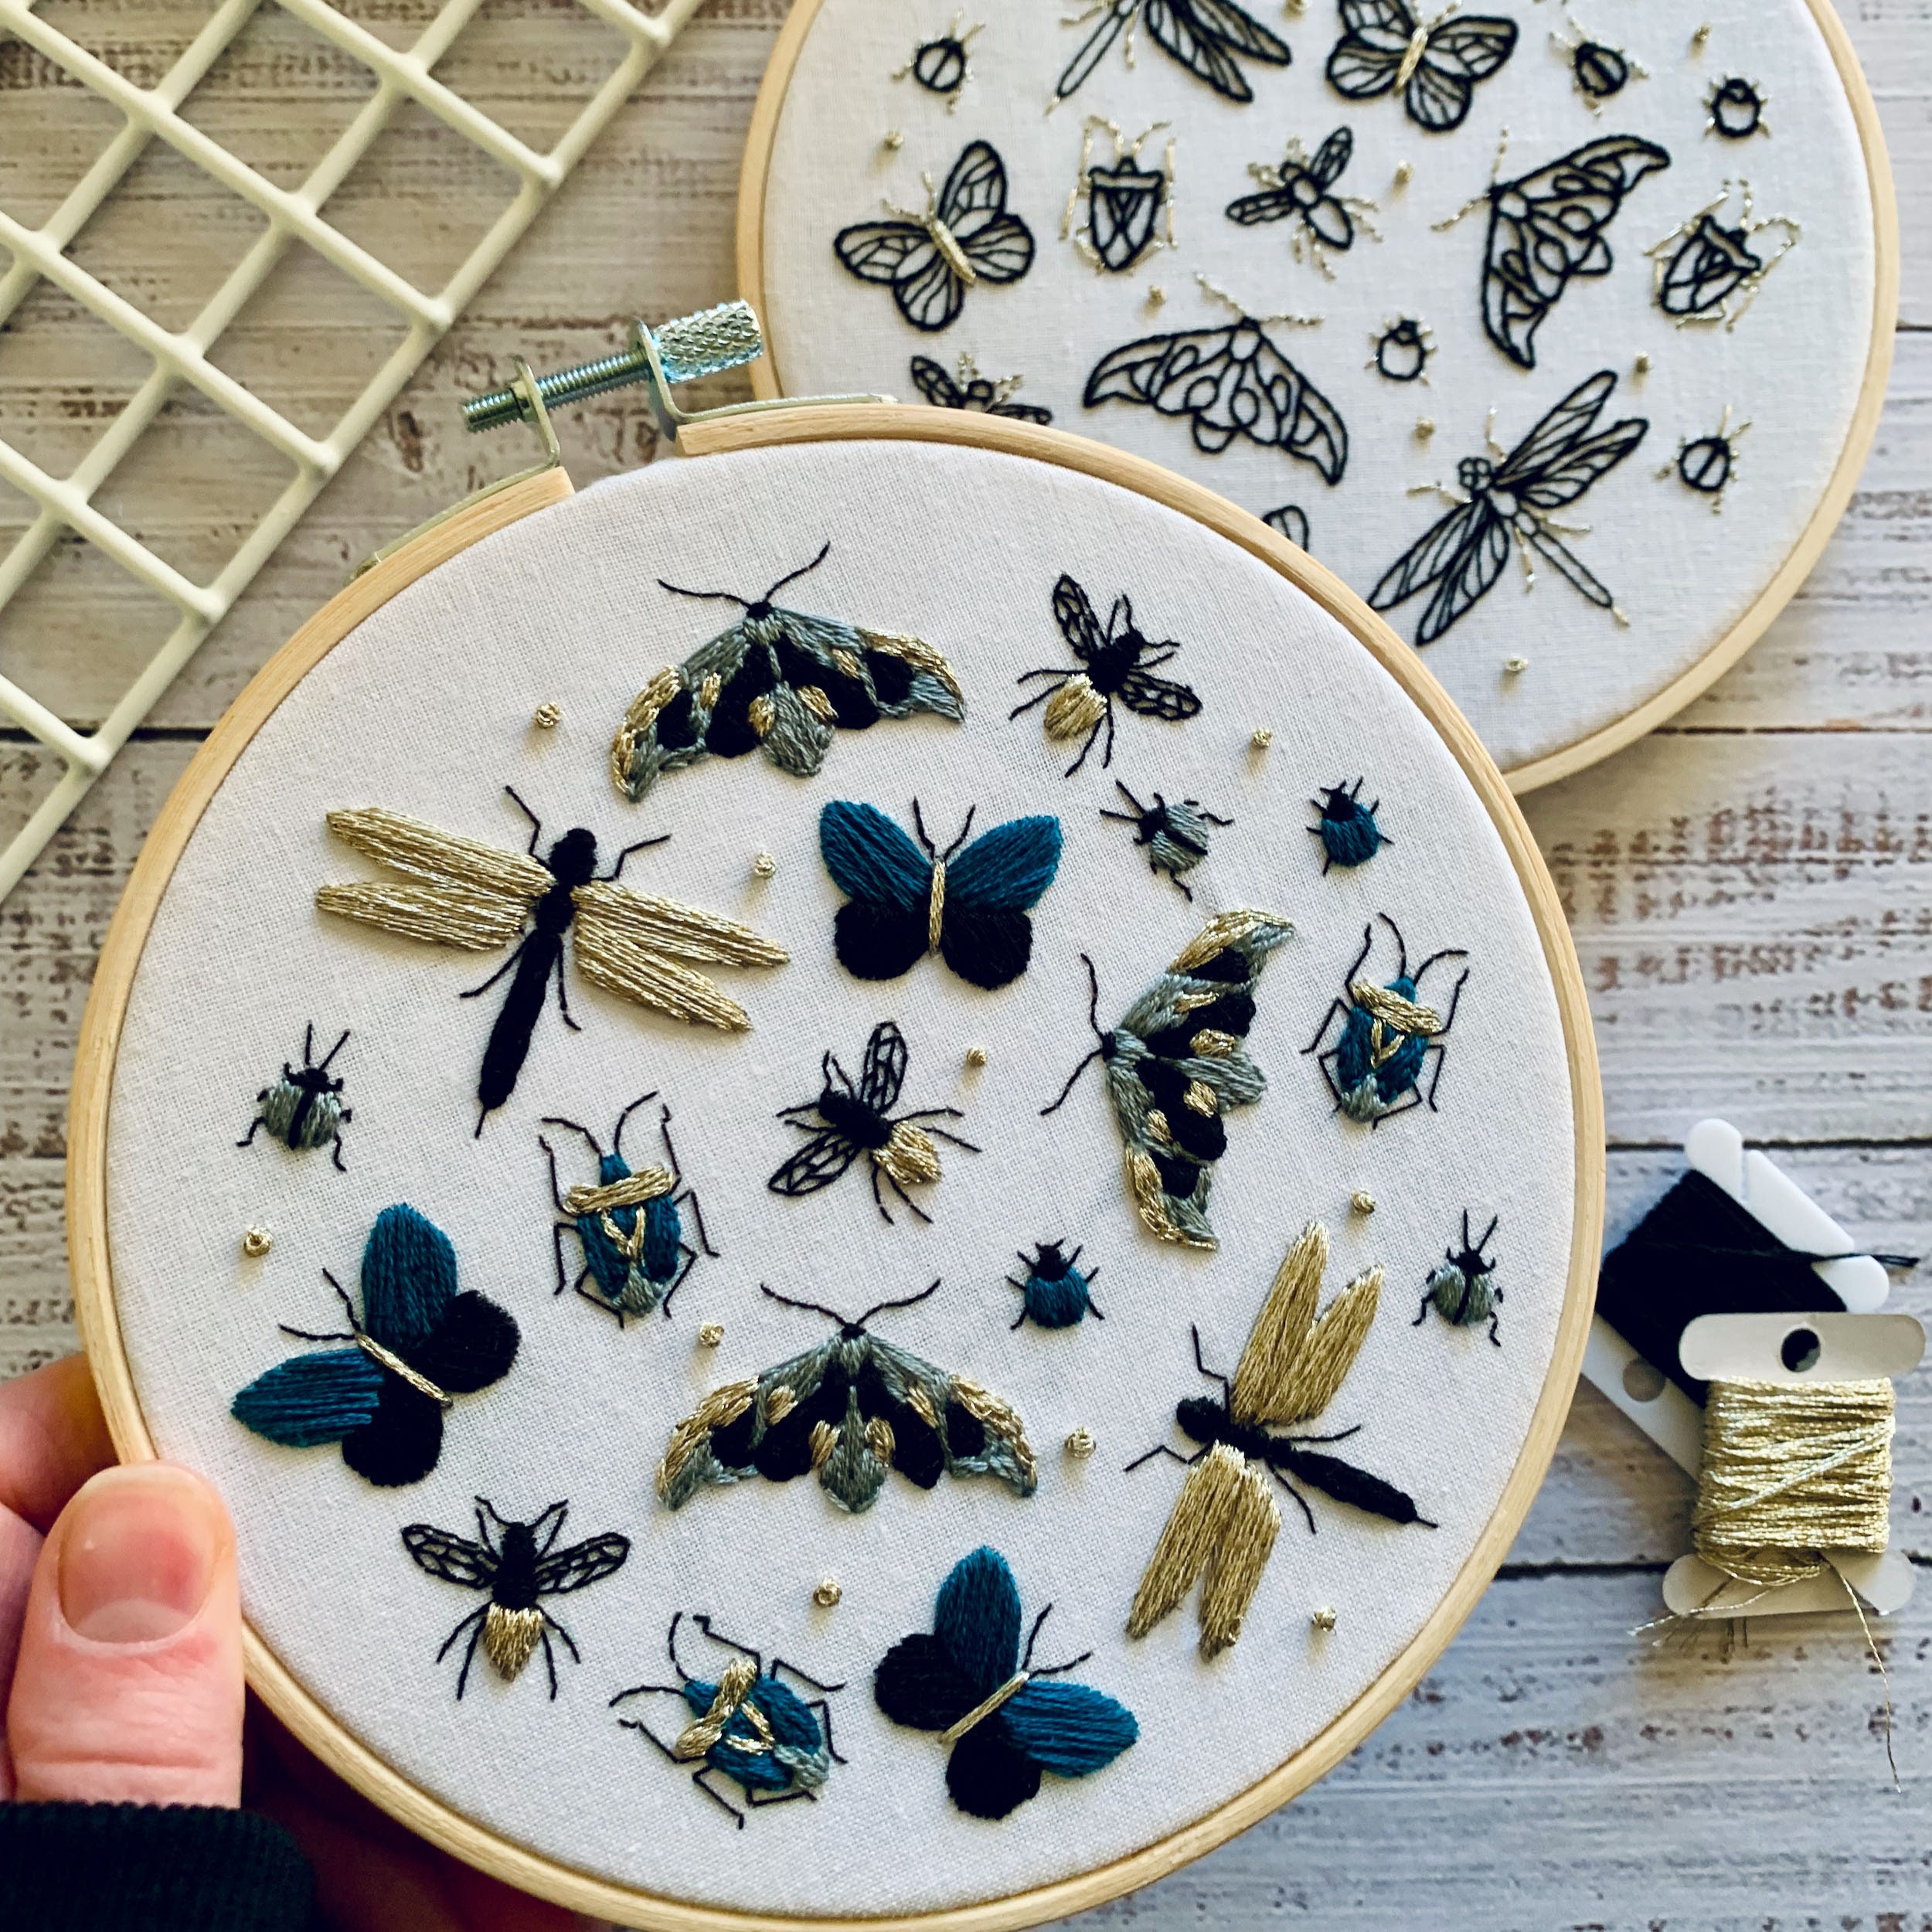 EMBROIDERY HOOP DIY Embroidery Kits for For Beginners $11.70